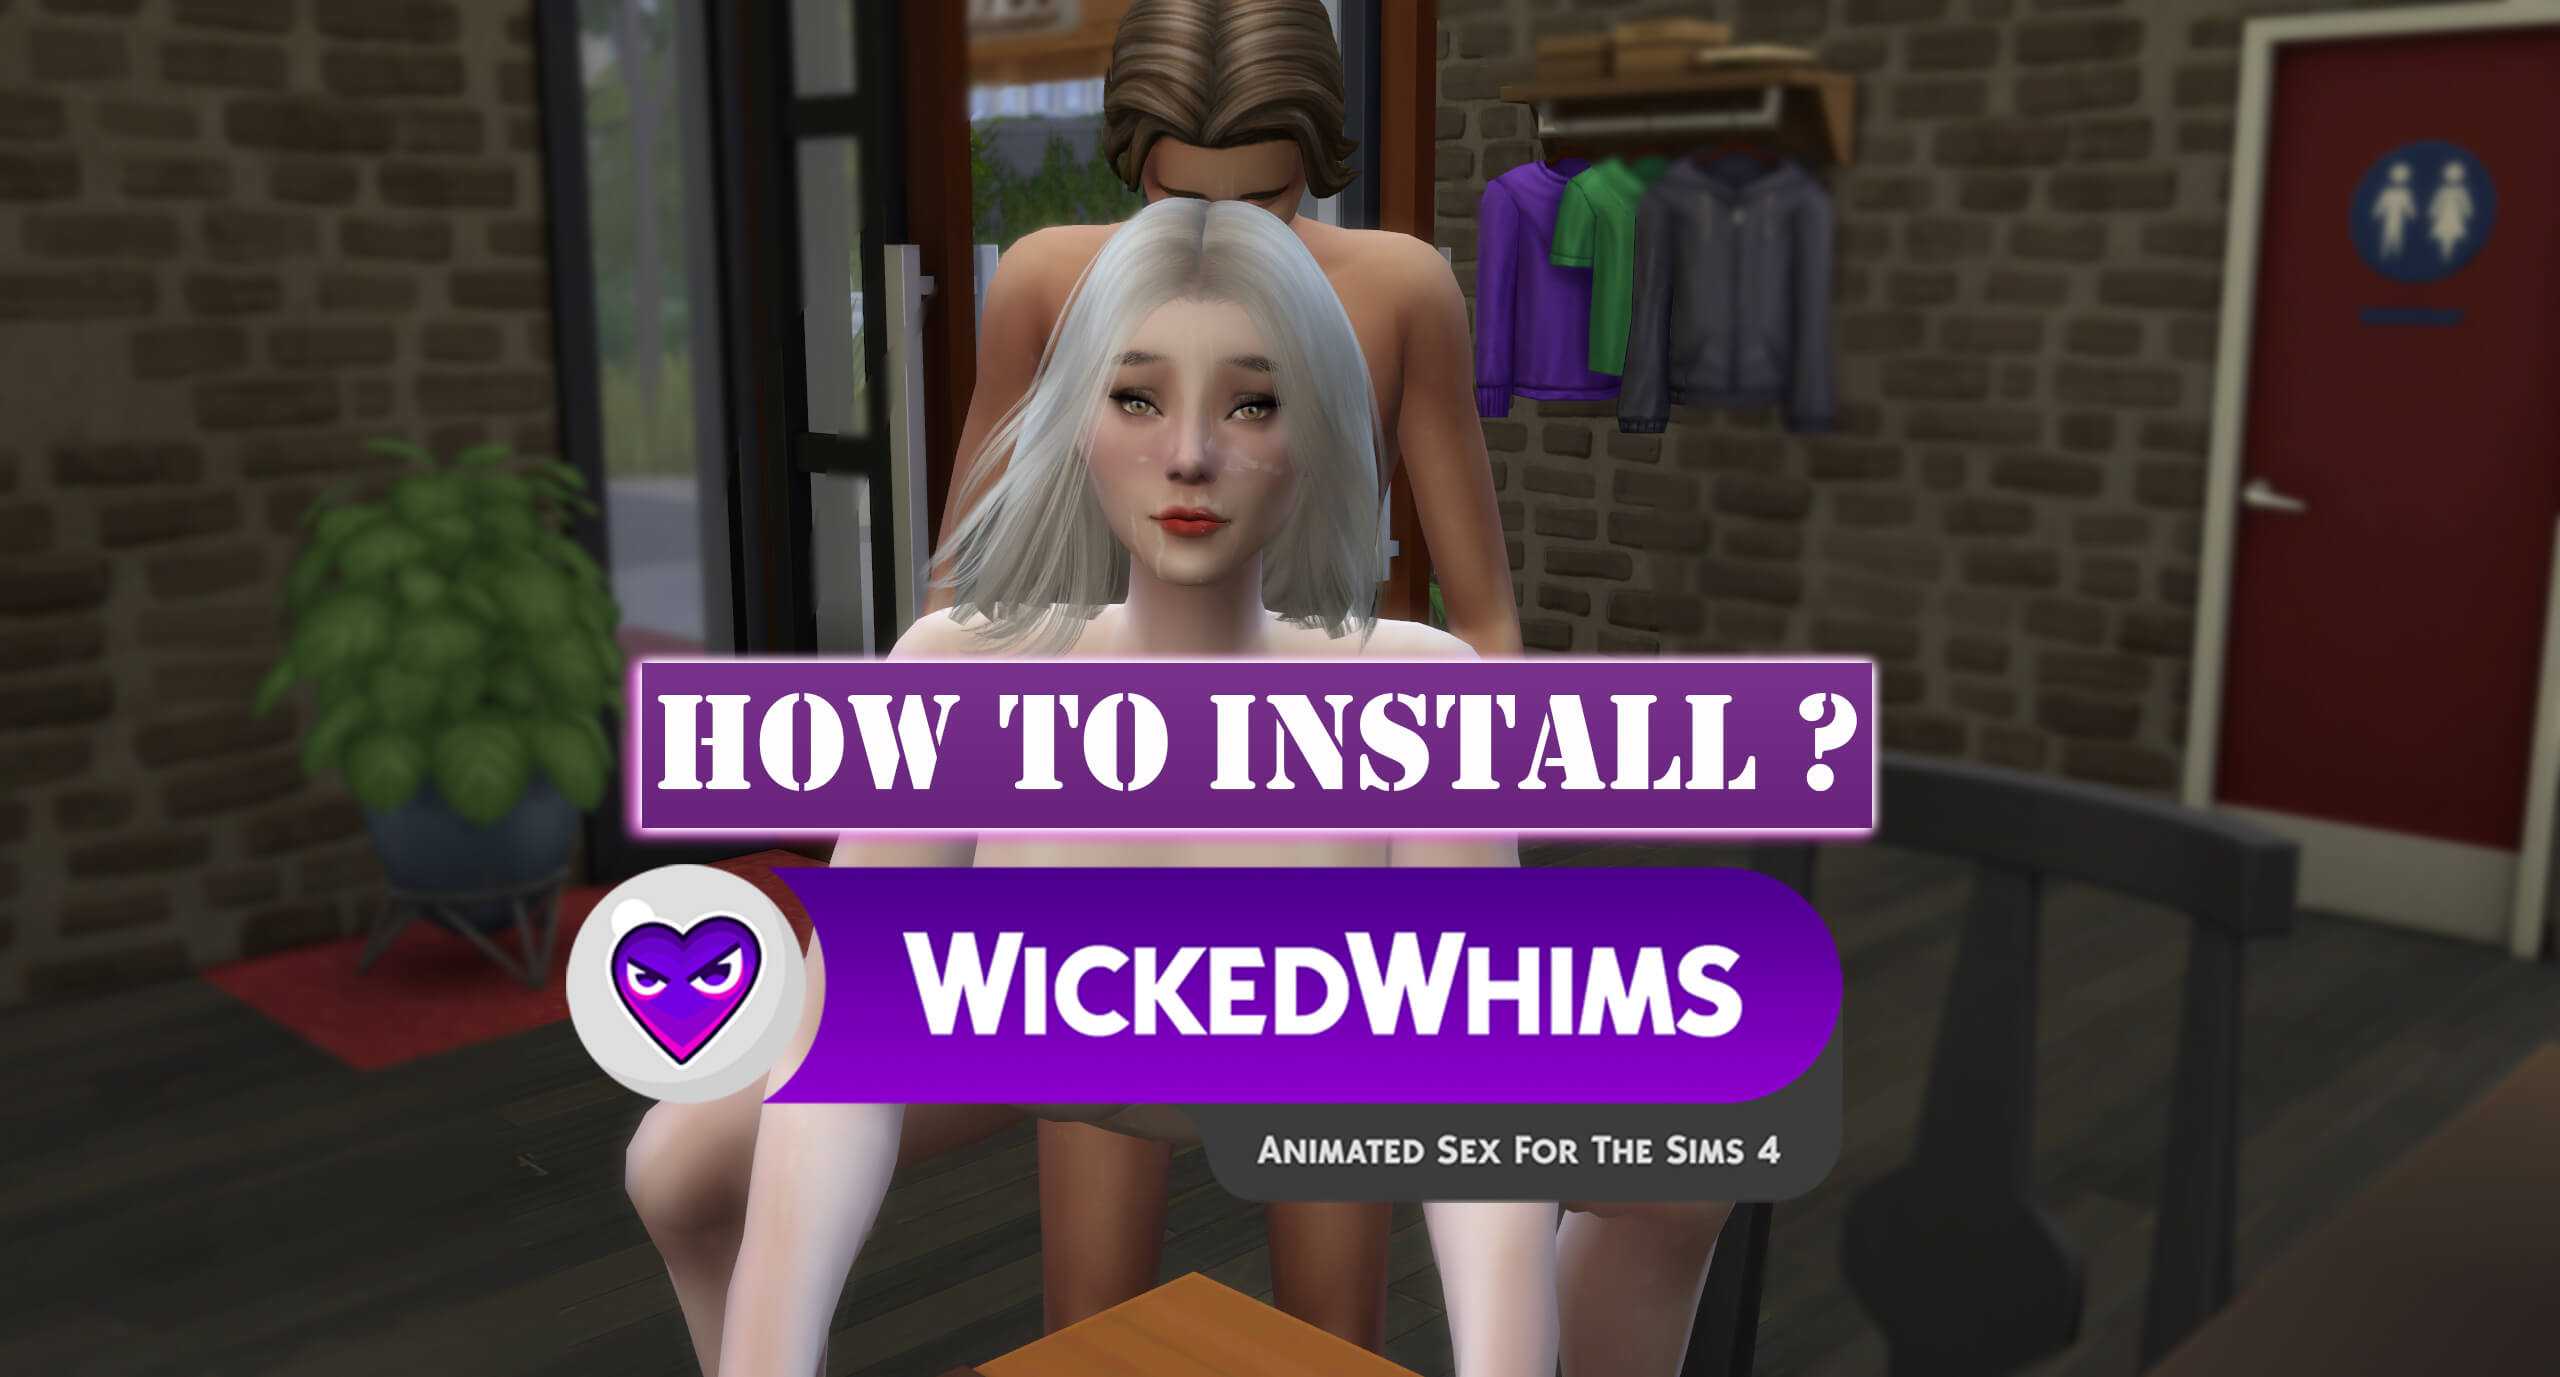 Whickedwhims русский. Whims SIMS 4. Фарфоровая кукла Wicked whims. Wicked whims SIMS 4 симс 4. SIMS 4 wickedwhims последняя версия.